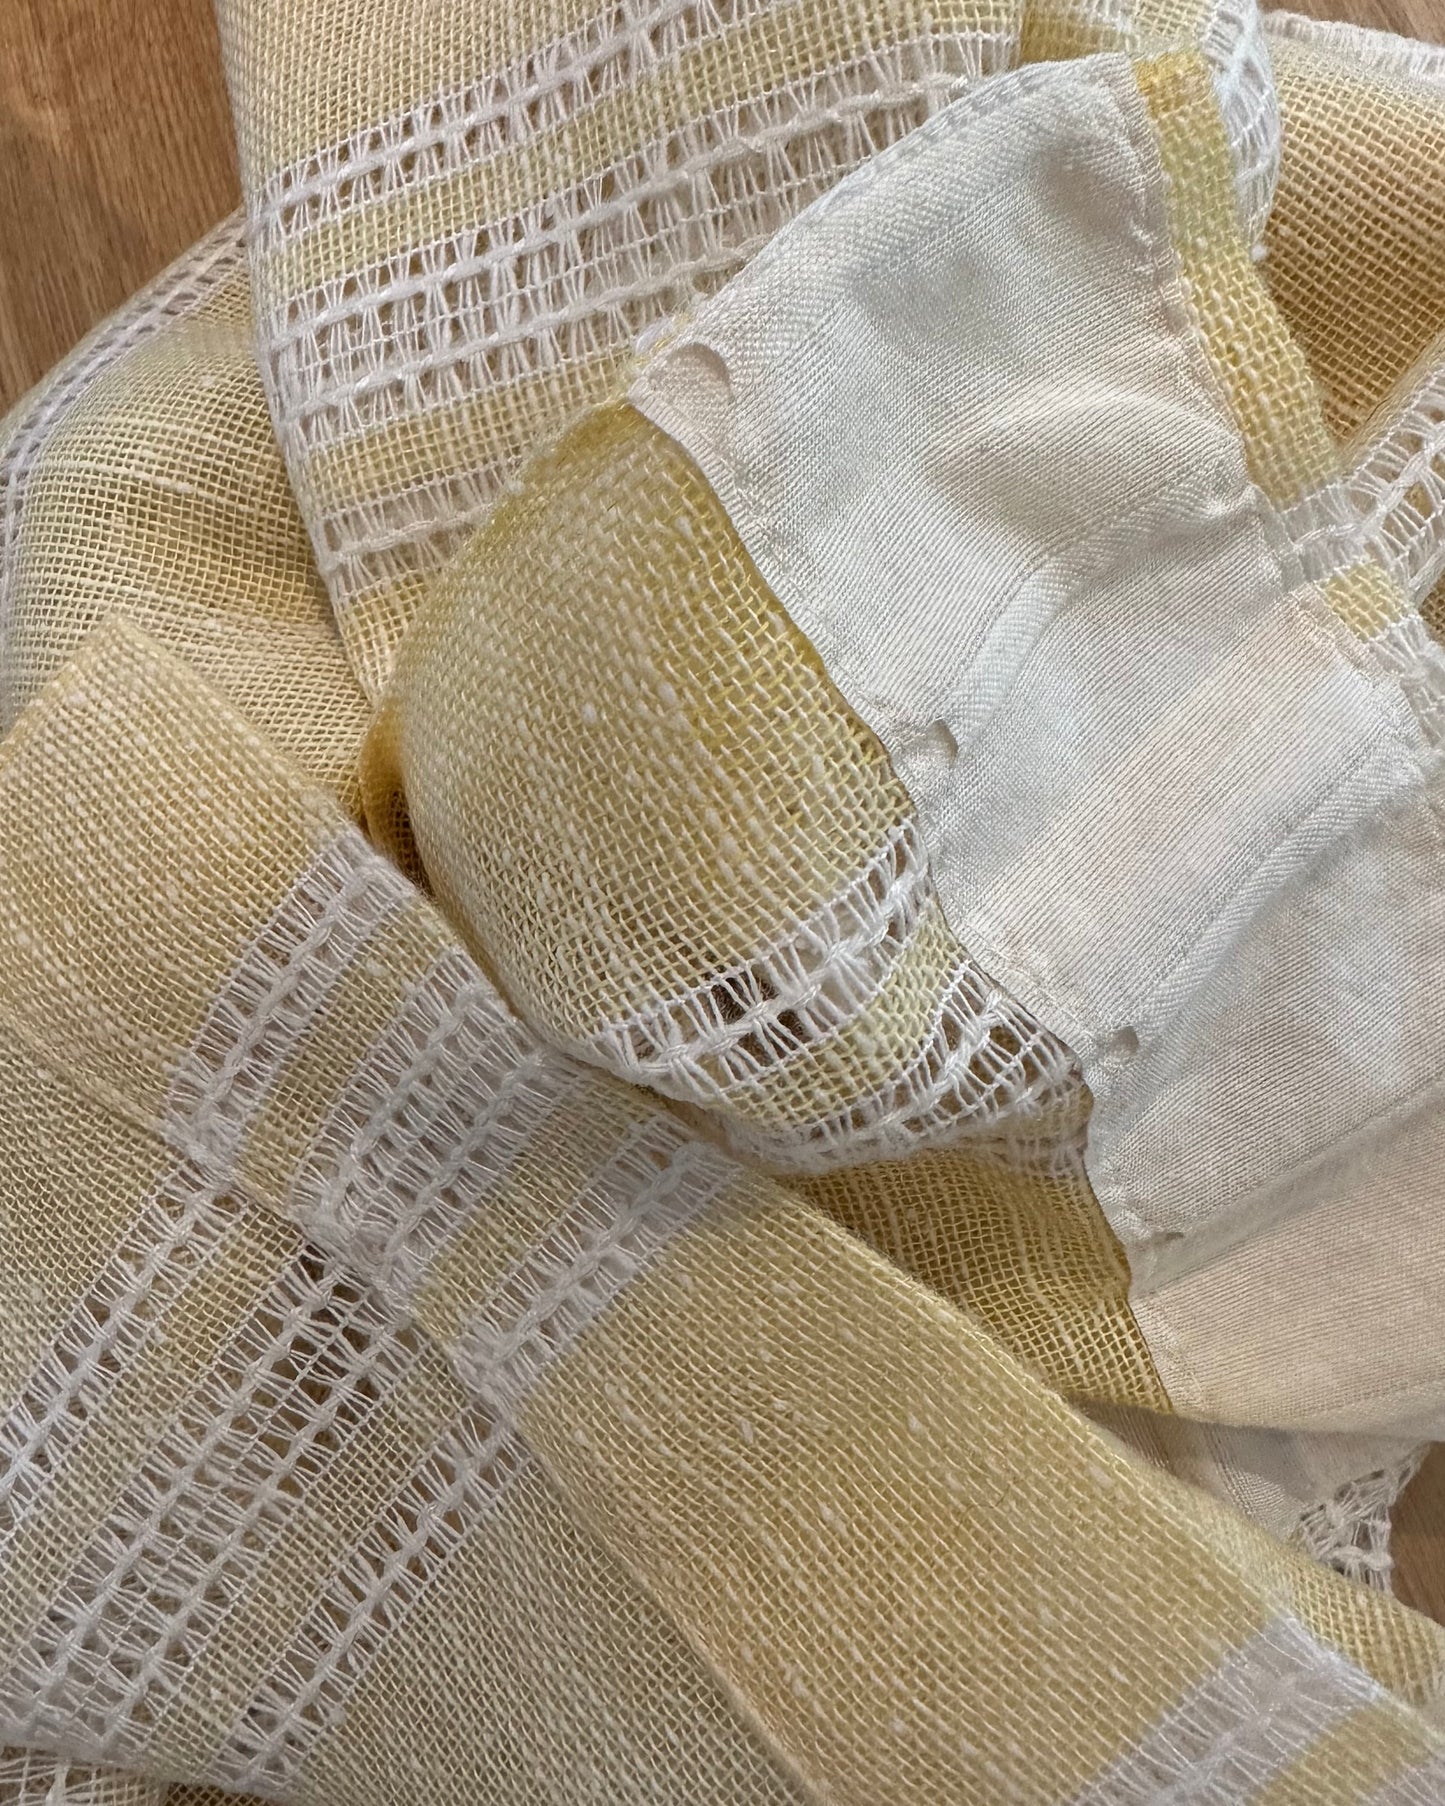 Pair of White and Yellow Curtains